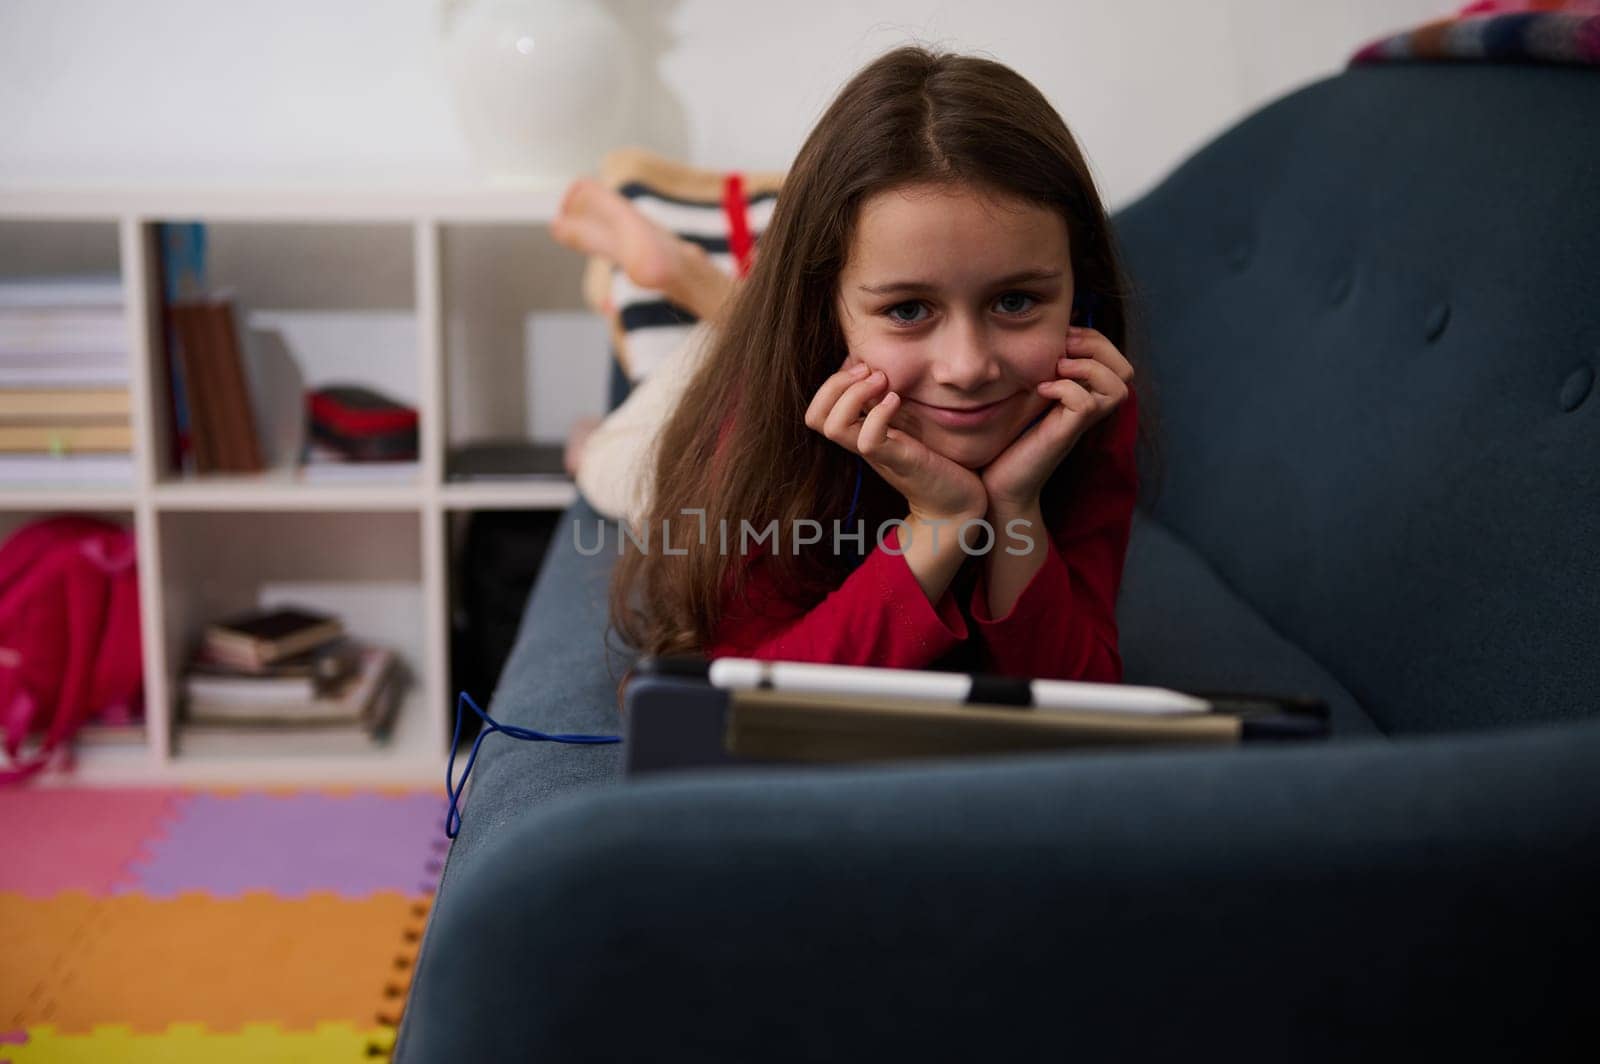 Little kid girl, addicted to digital gadgets, playing online video games while lying on the sofa at home. Lovely school girl watching movies, smiling looking at camera. Happy carefree childhood by artgf